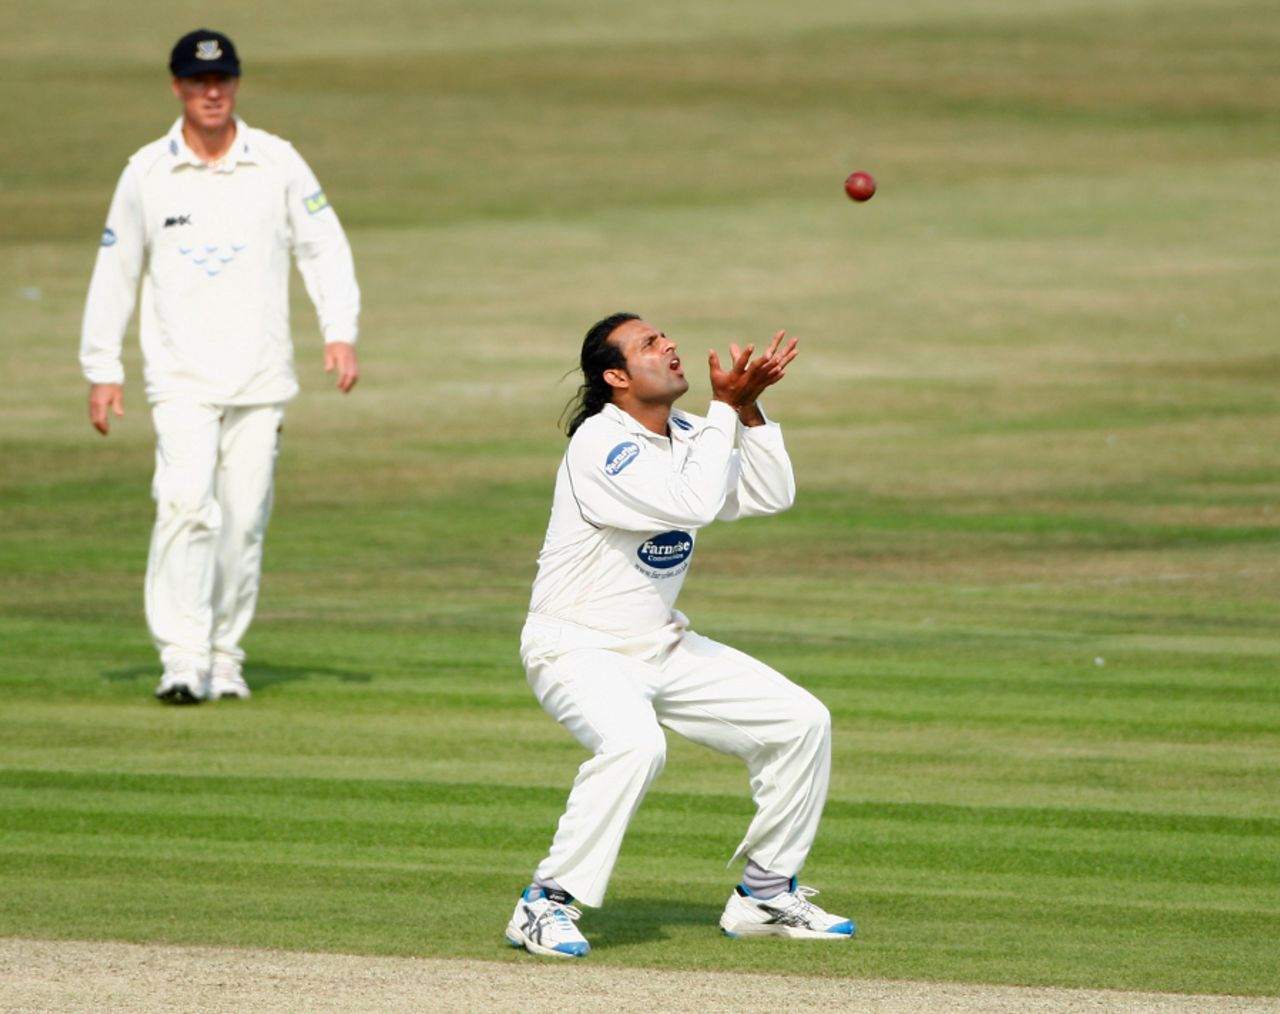 Naved-ul-Hasan had Danny Briggs caught-and-bowled, Sussex v Hampshire, County Championship Division One, Hove, July 11 2011